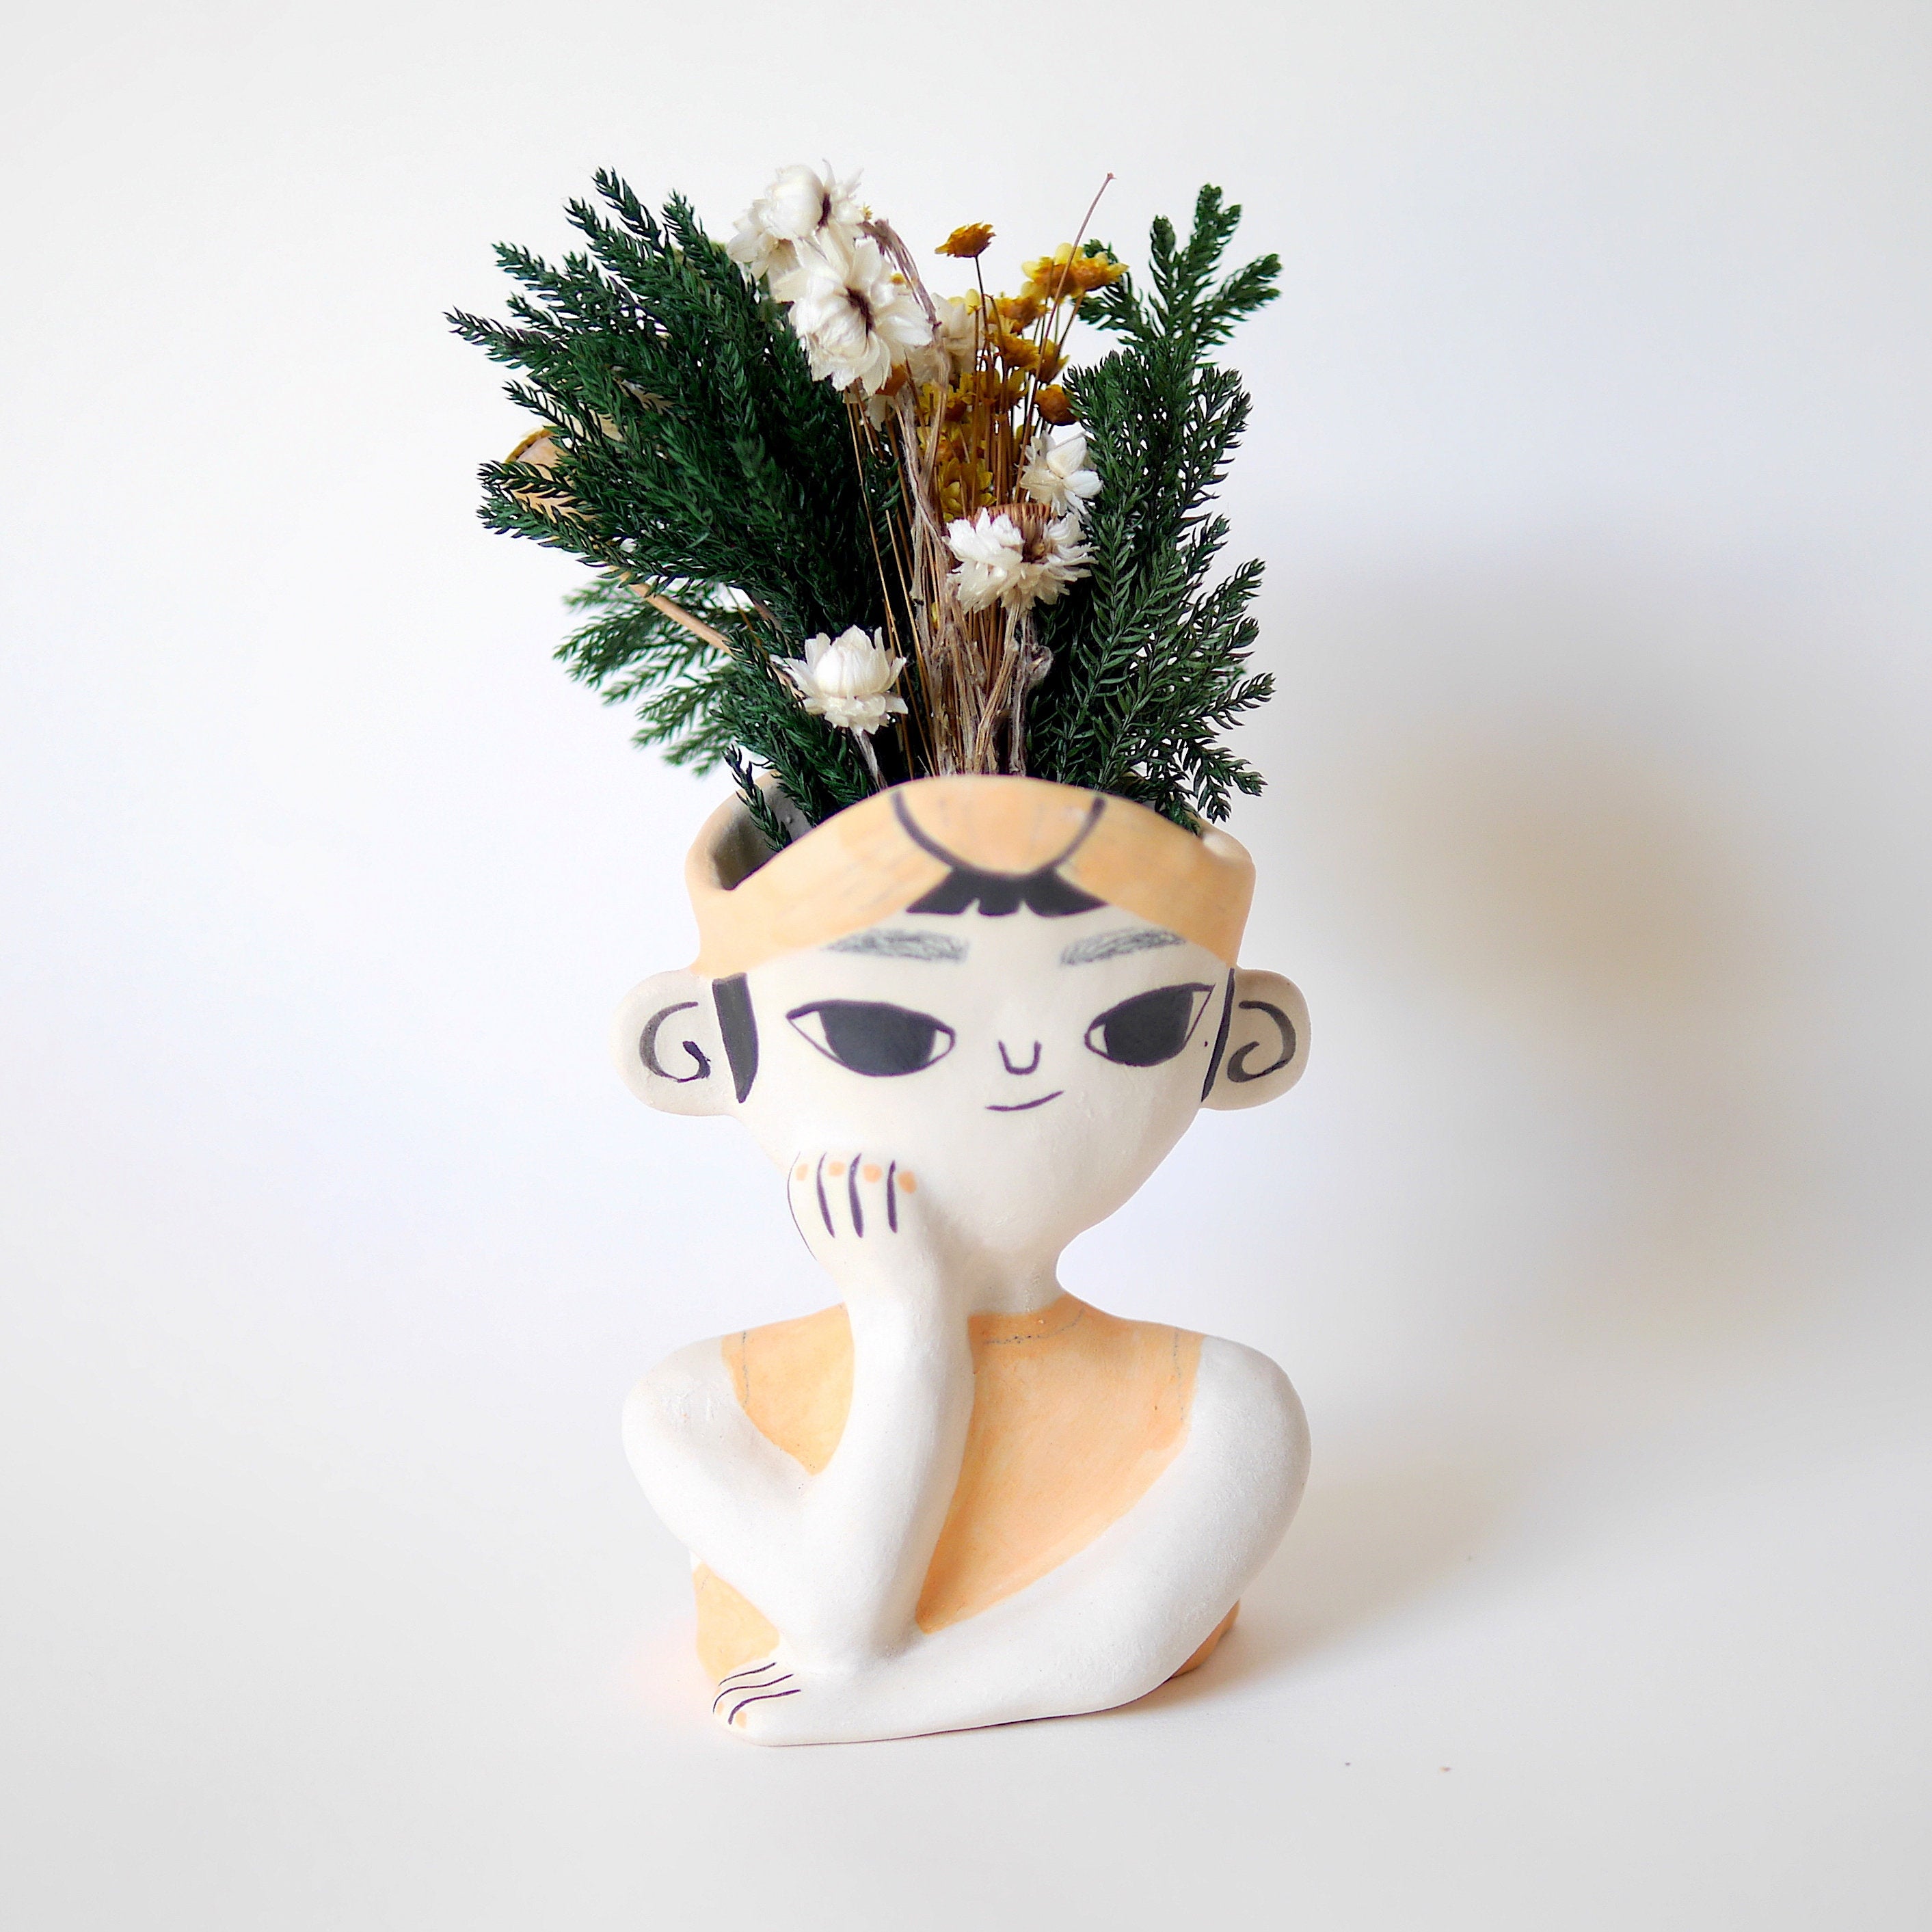 Face planter by Two Hold Studios